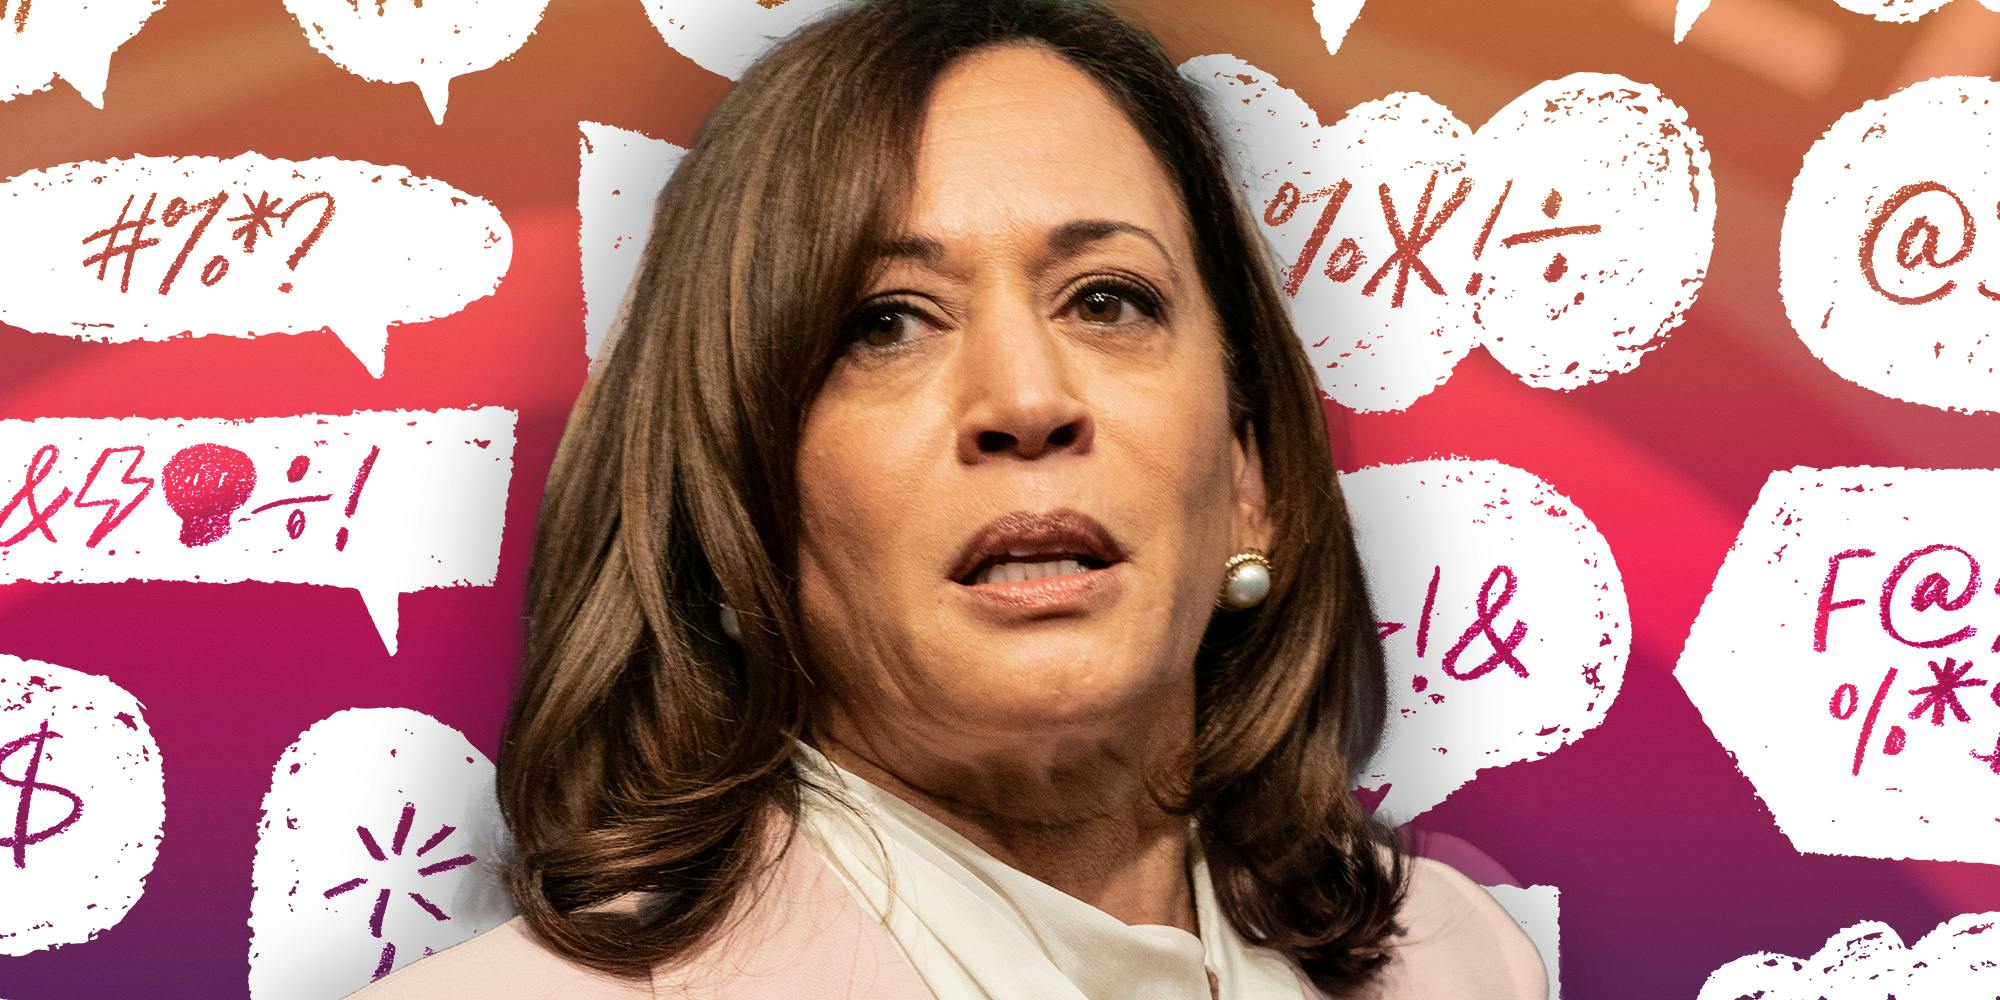 Kamala Harris faces slew of sexist monikers as right-wing ratchets up attacks